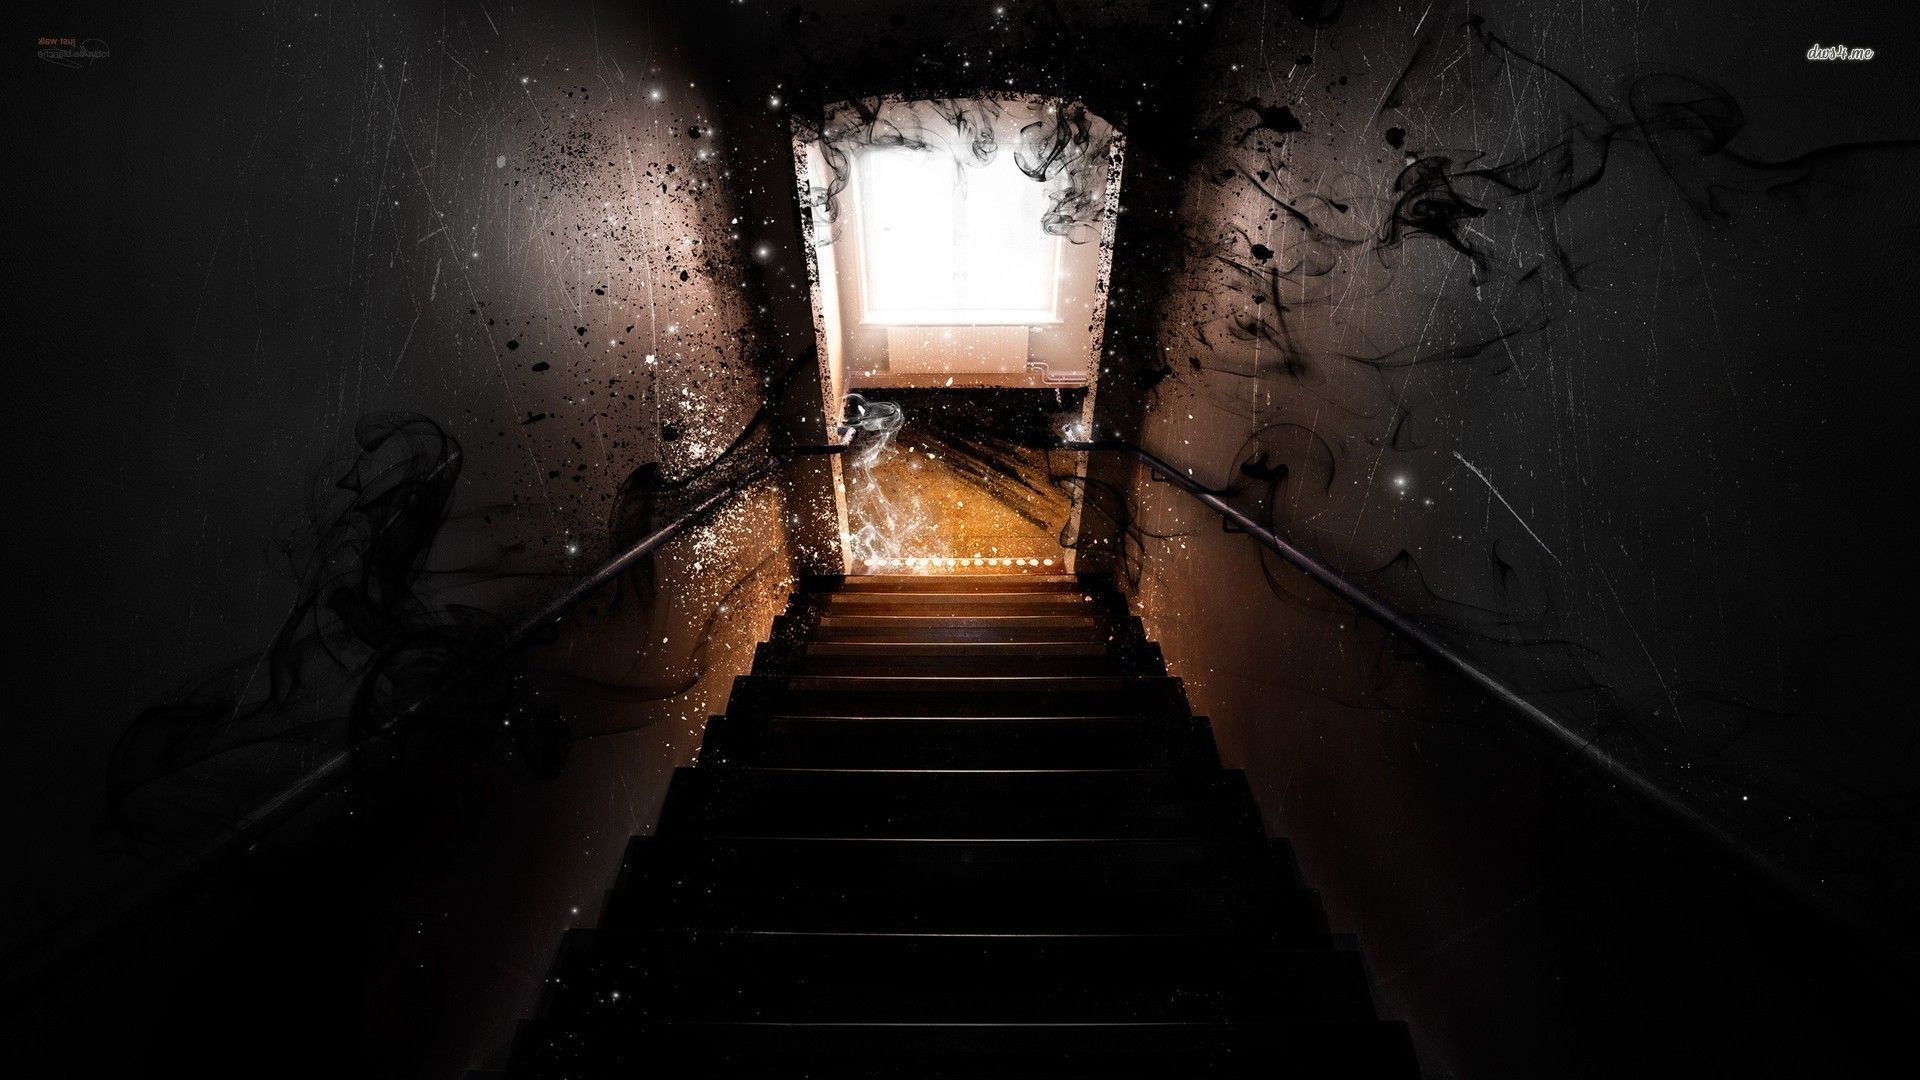 Scary stairs wallpaper - Digital Art wallpapers - #17852